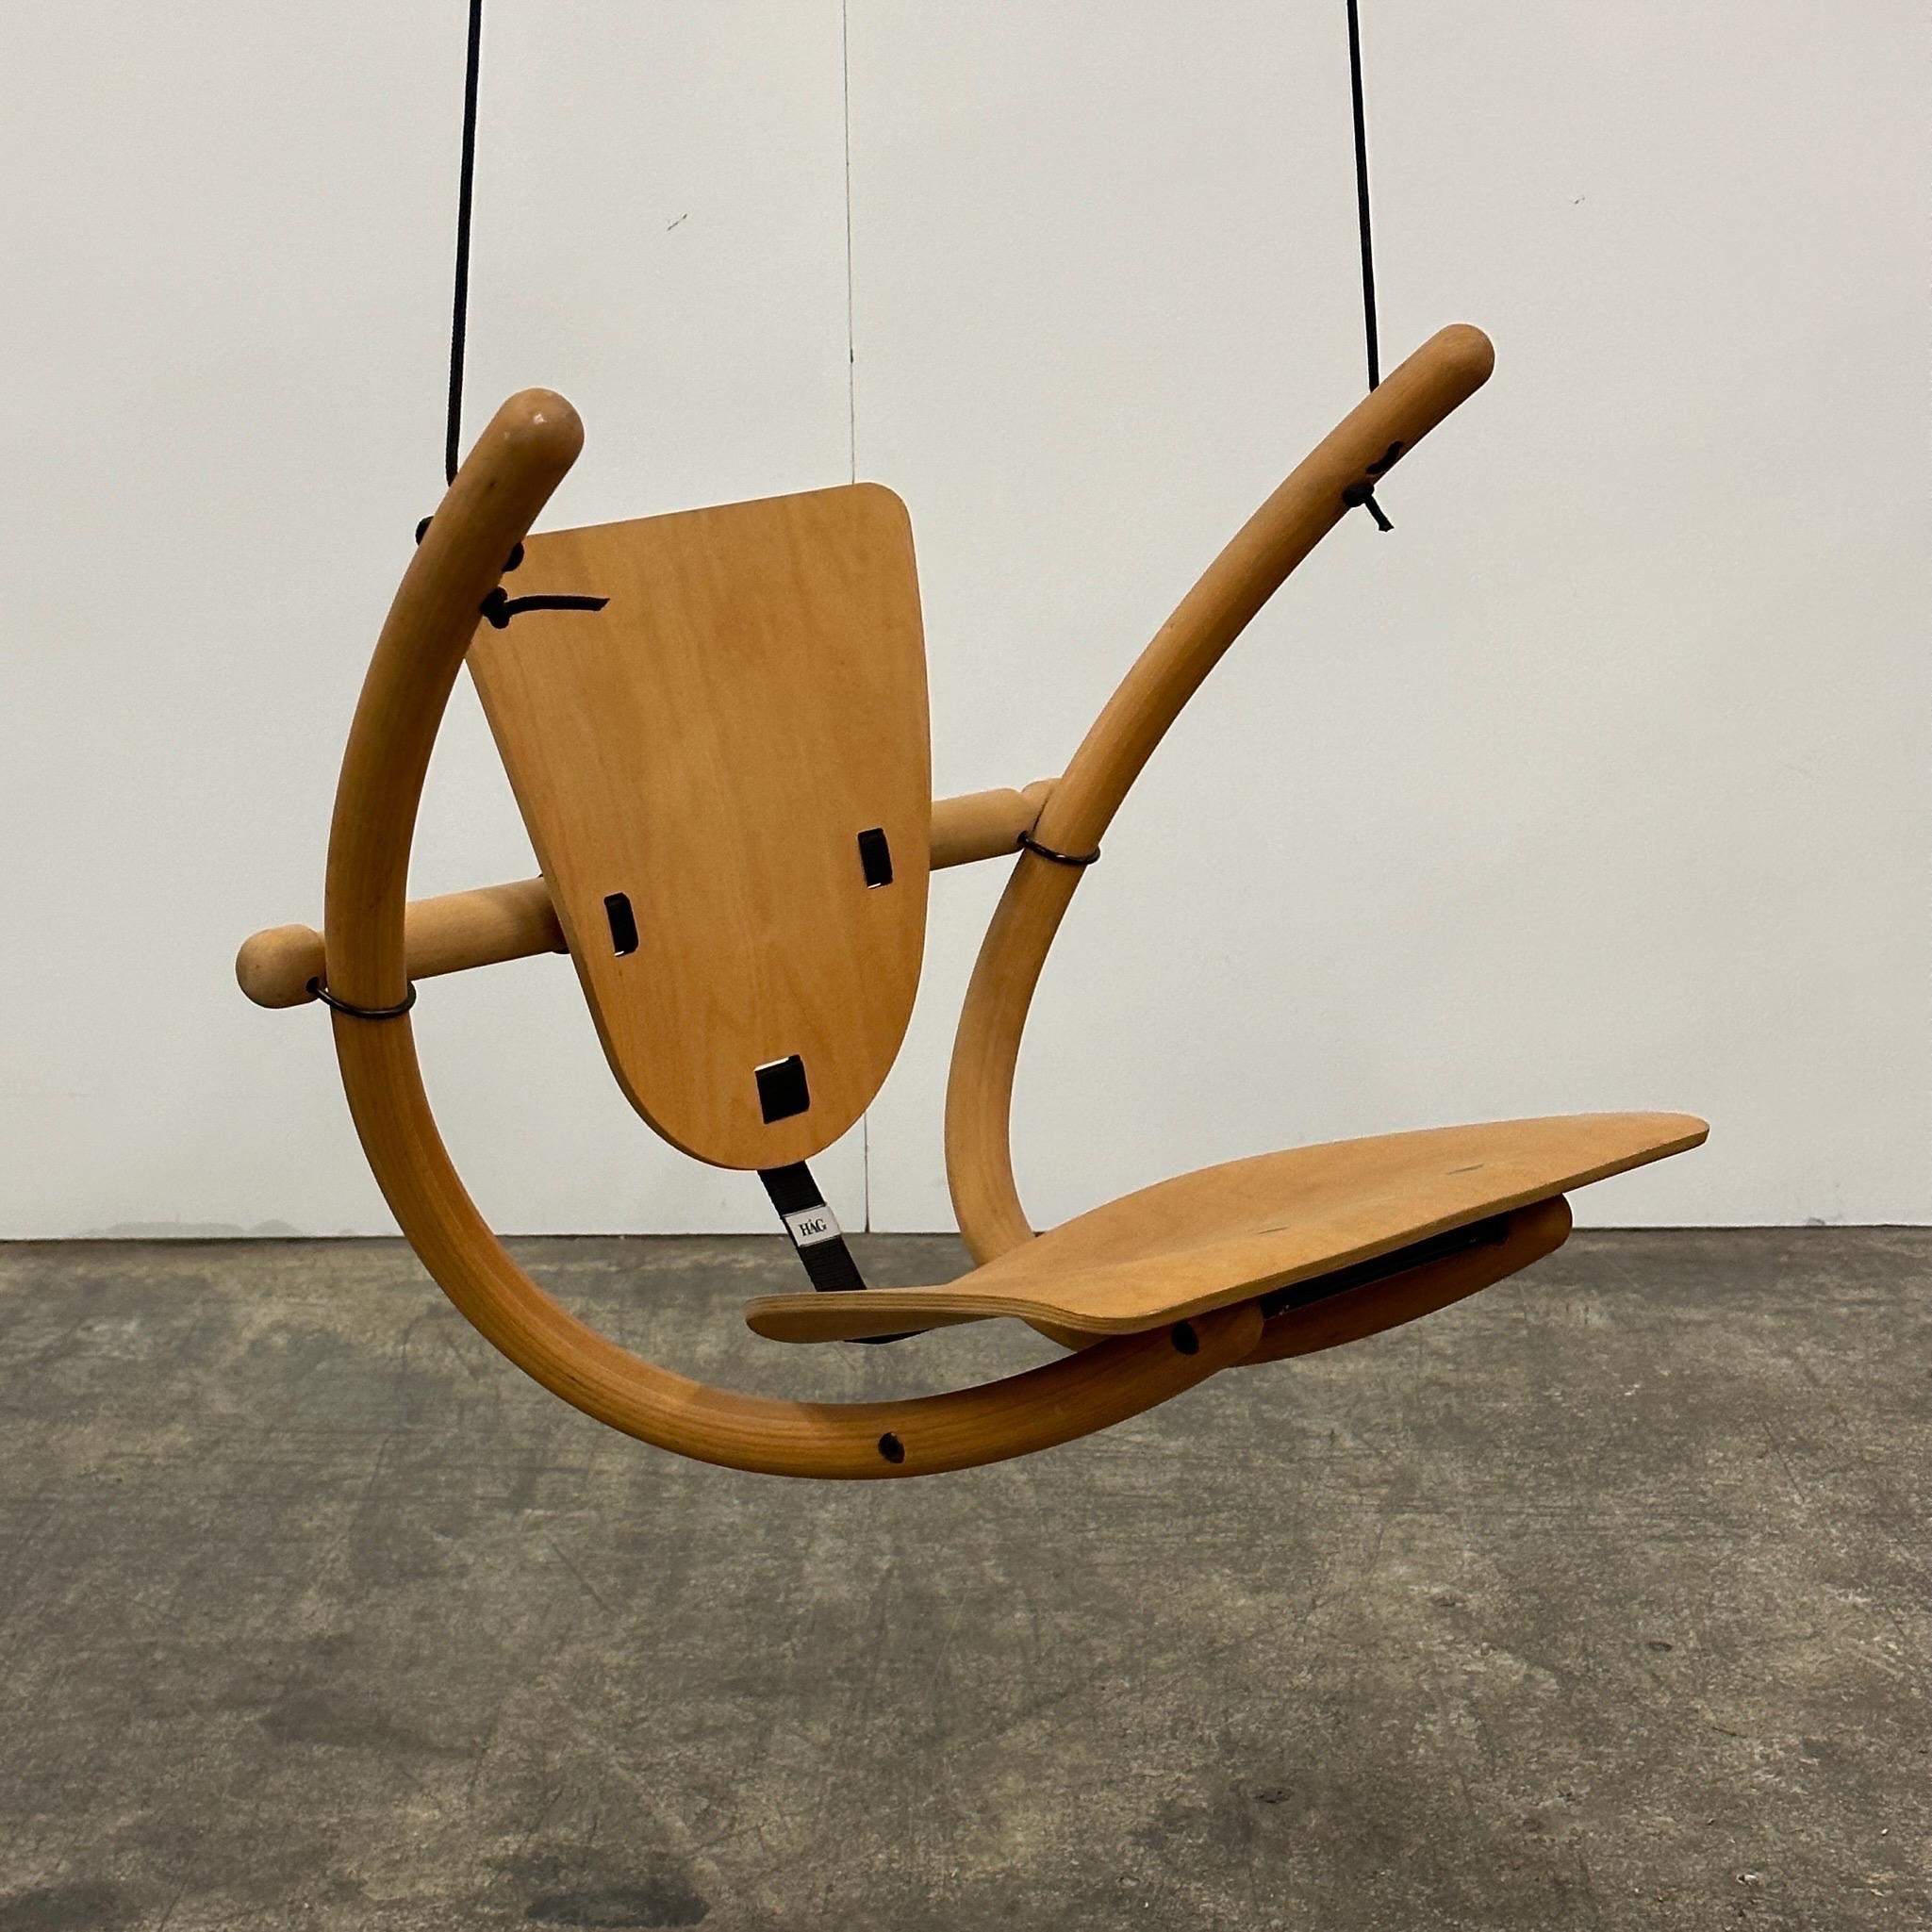 c. 1999. Edition 445/500. Full wood construction with reclining backrest. Rope provided is very long. Extremely rare chair.